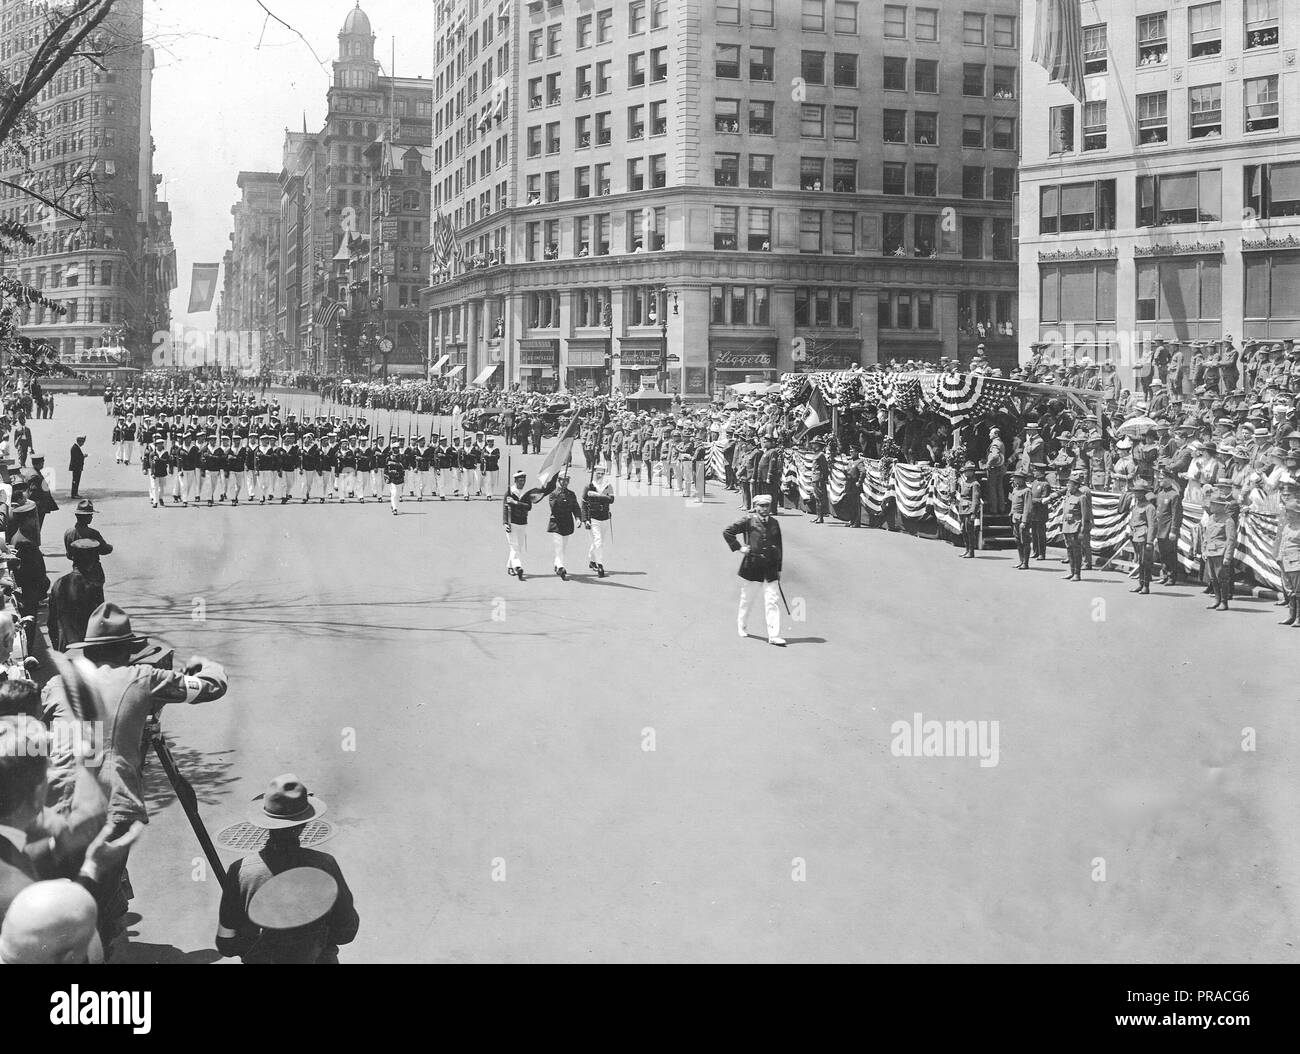 Ceremonies - Independence Day, 1918 - French Marines. 4th July Parade. Independence Day Parade, 1918 New York City. French marines marching in the parade Stock Photo